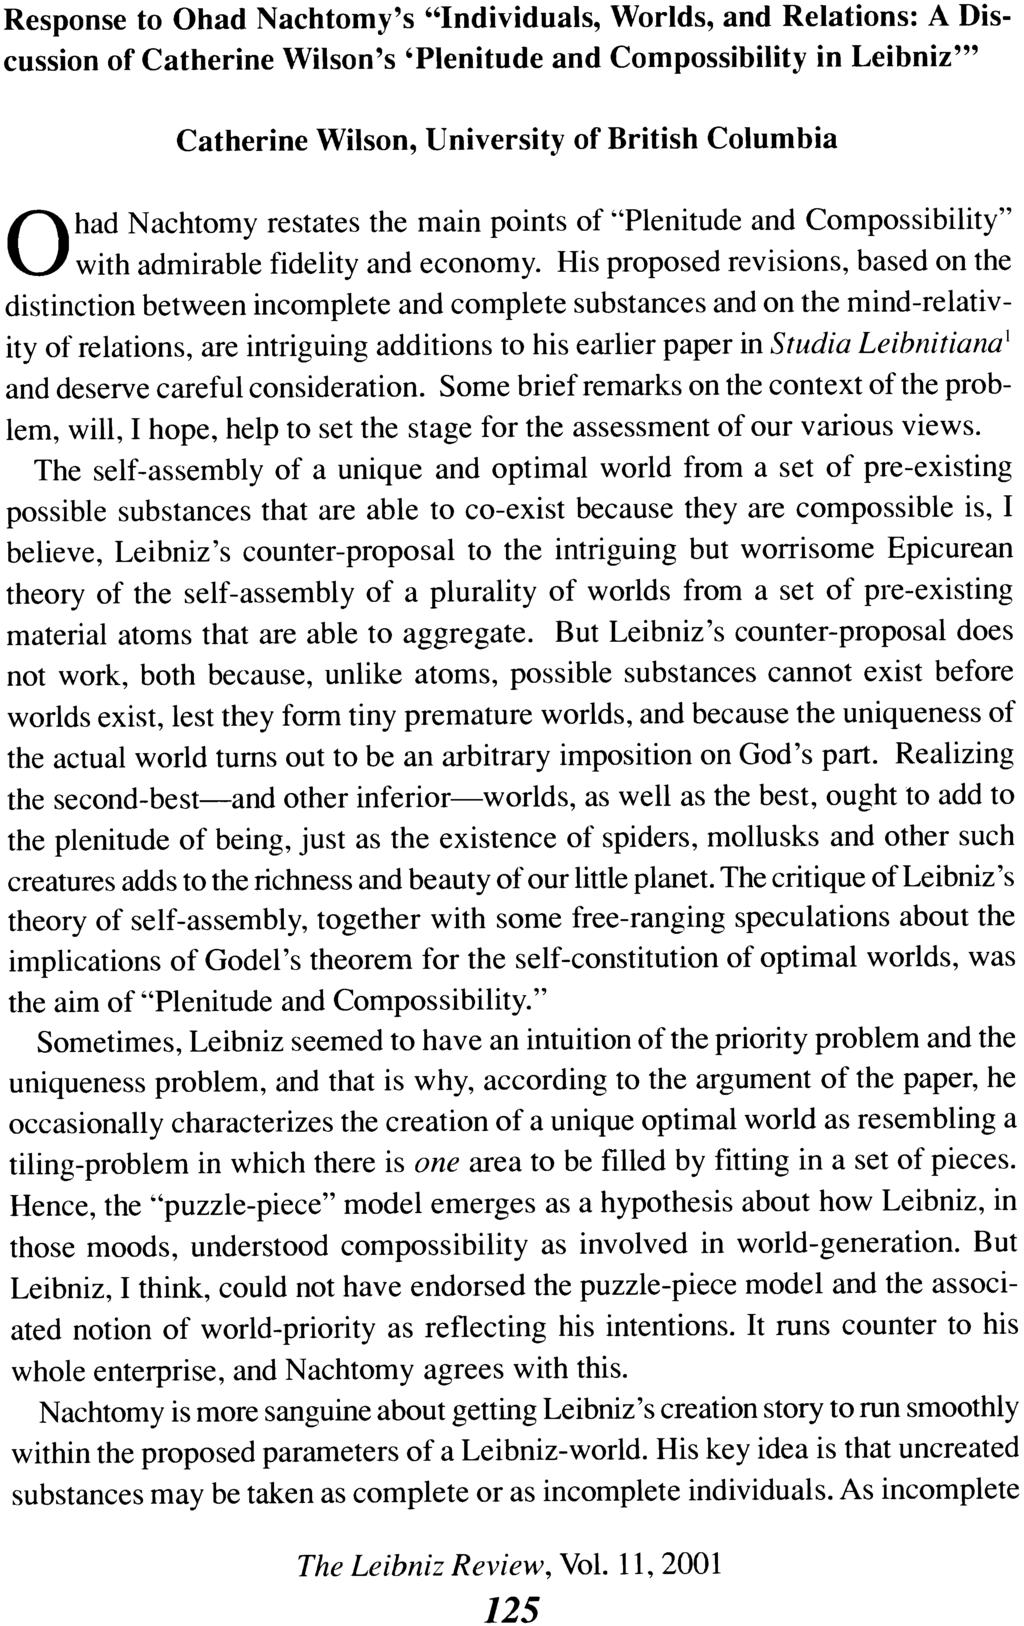 Response to Ohad Nachtomy's "Individuals, Worlds, and Relations: A Discussion of Catherine Wilson's 'Plenitude and Com possibility in Leibniz'" Catherine Wilson, University of British Columbia had